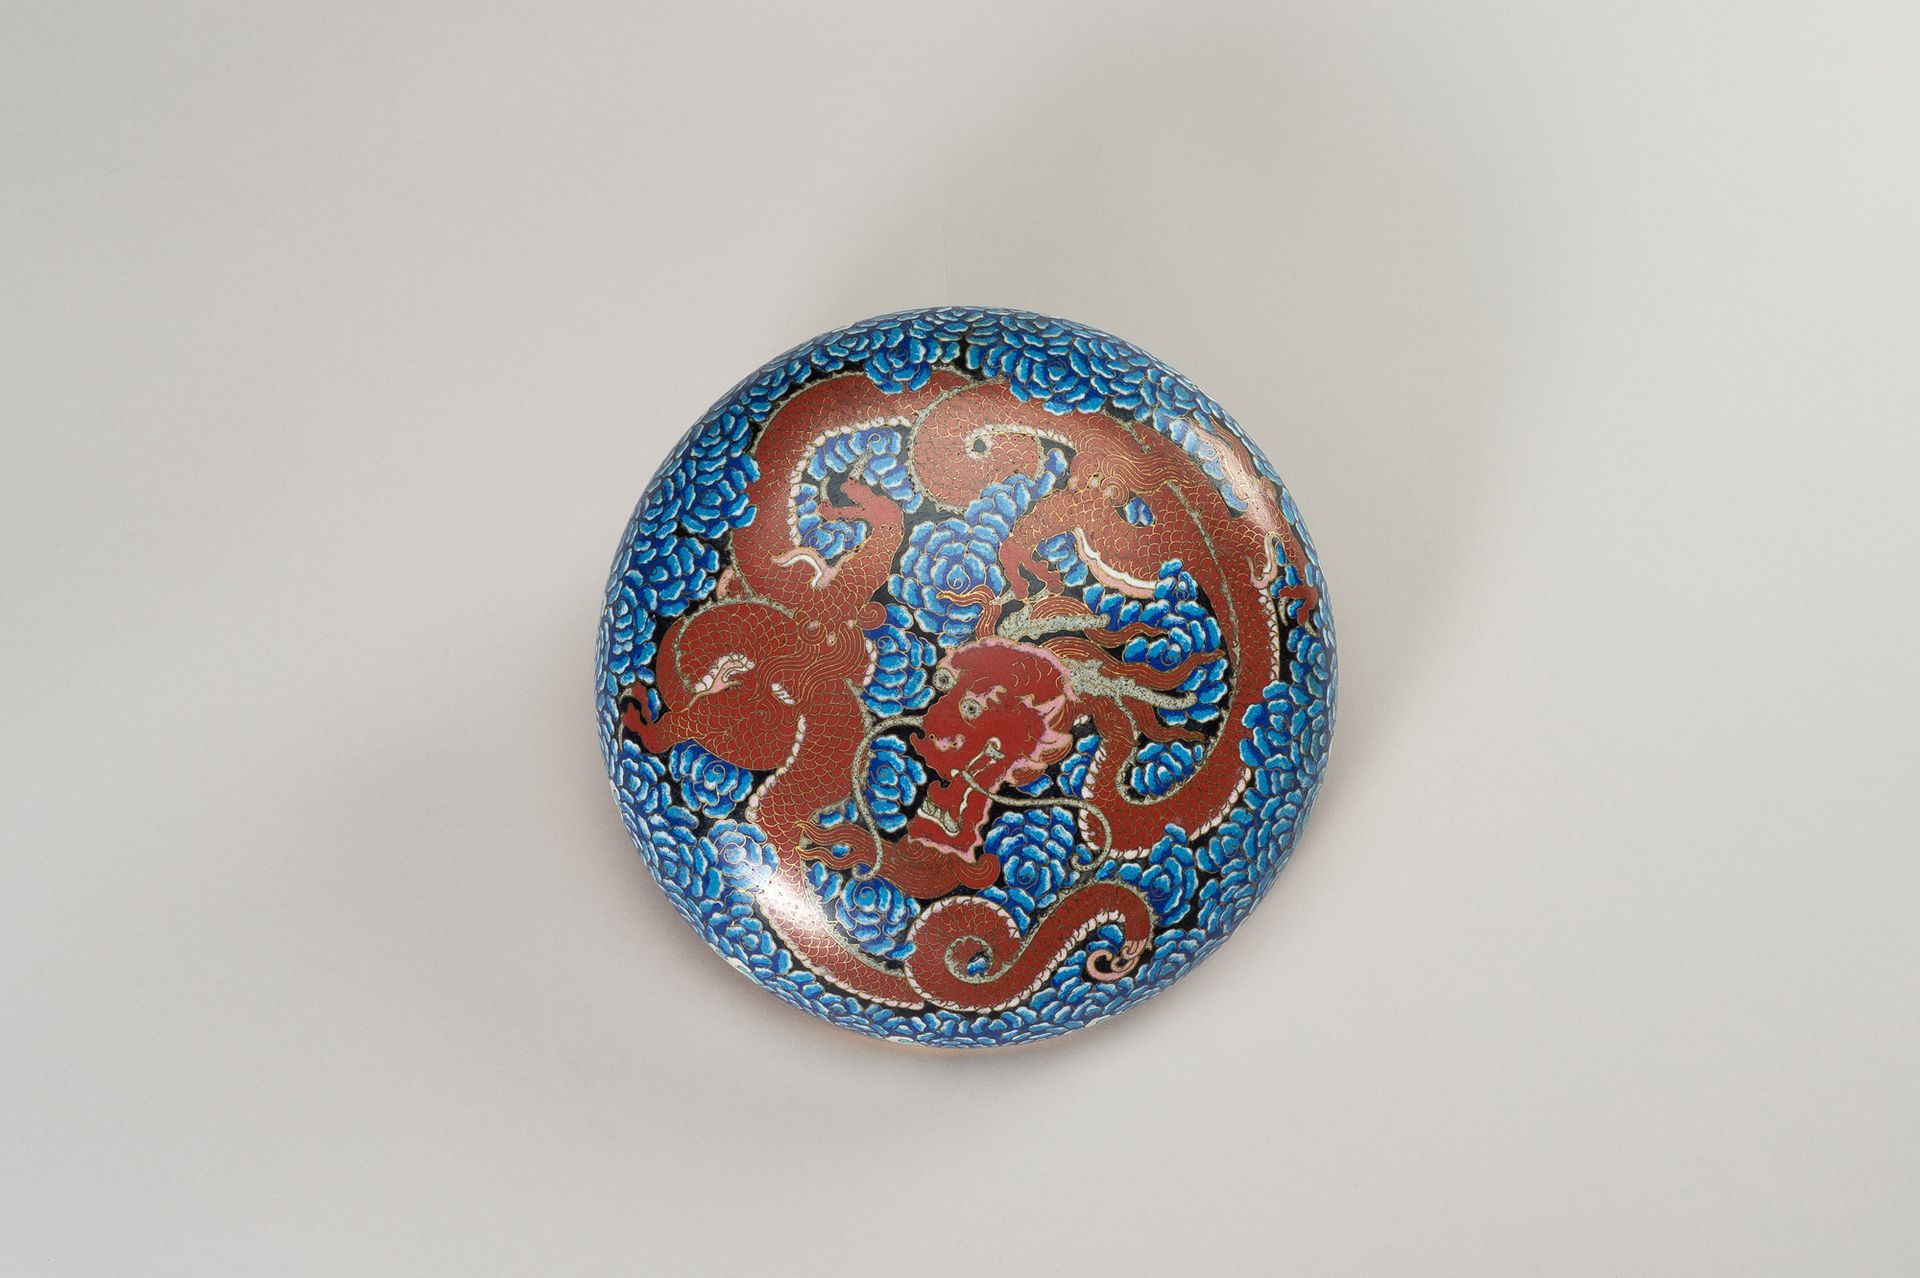 A FINE CLOISONNÉ BOX WITH DRAGON AND CLOUDS A FINE CLOISONNÉ BOX WITH DRAGON AND&hellip;